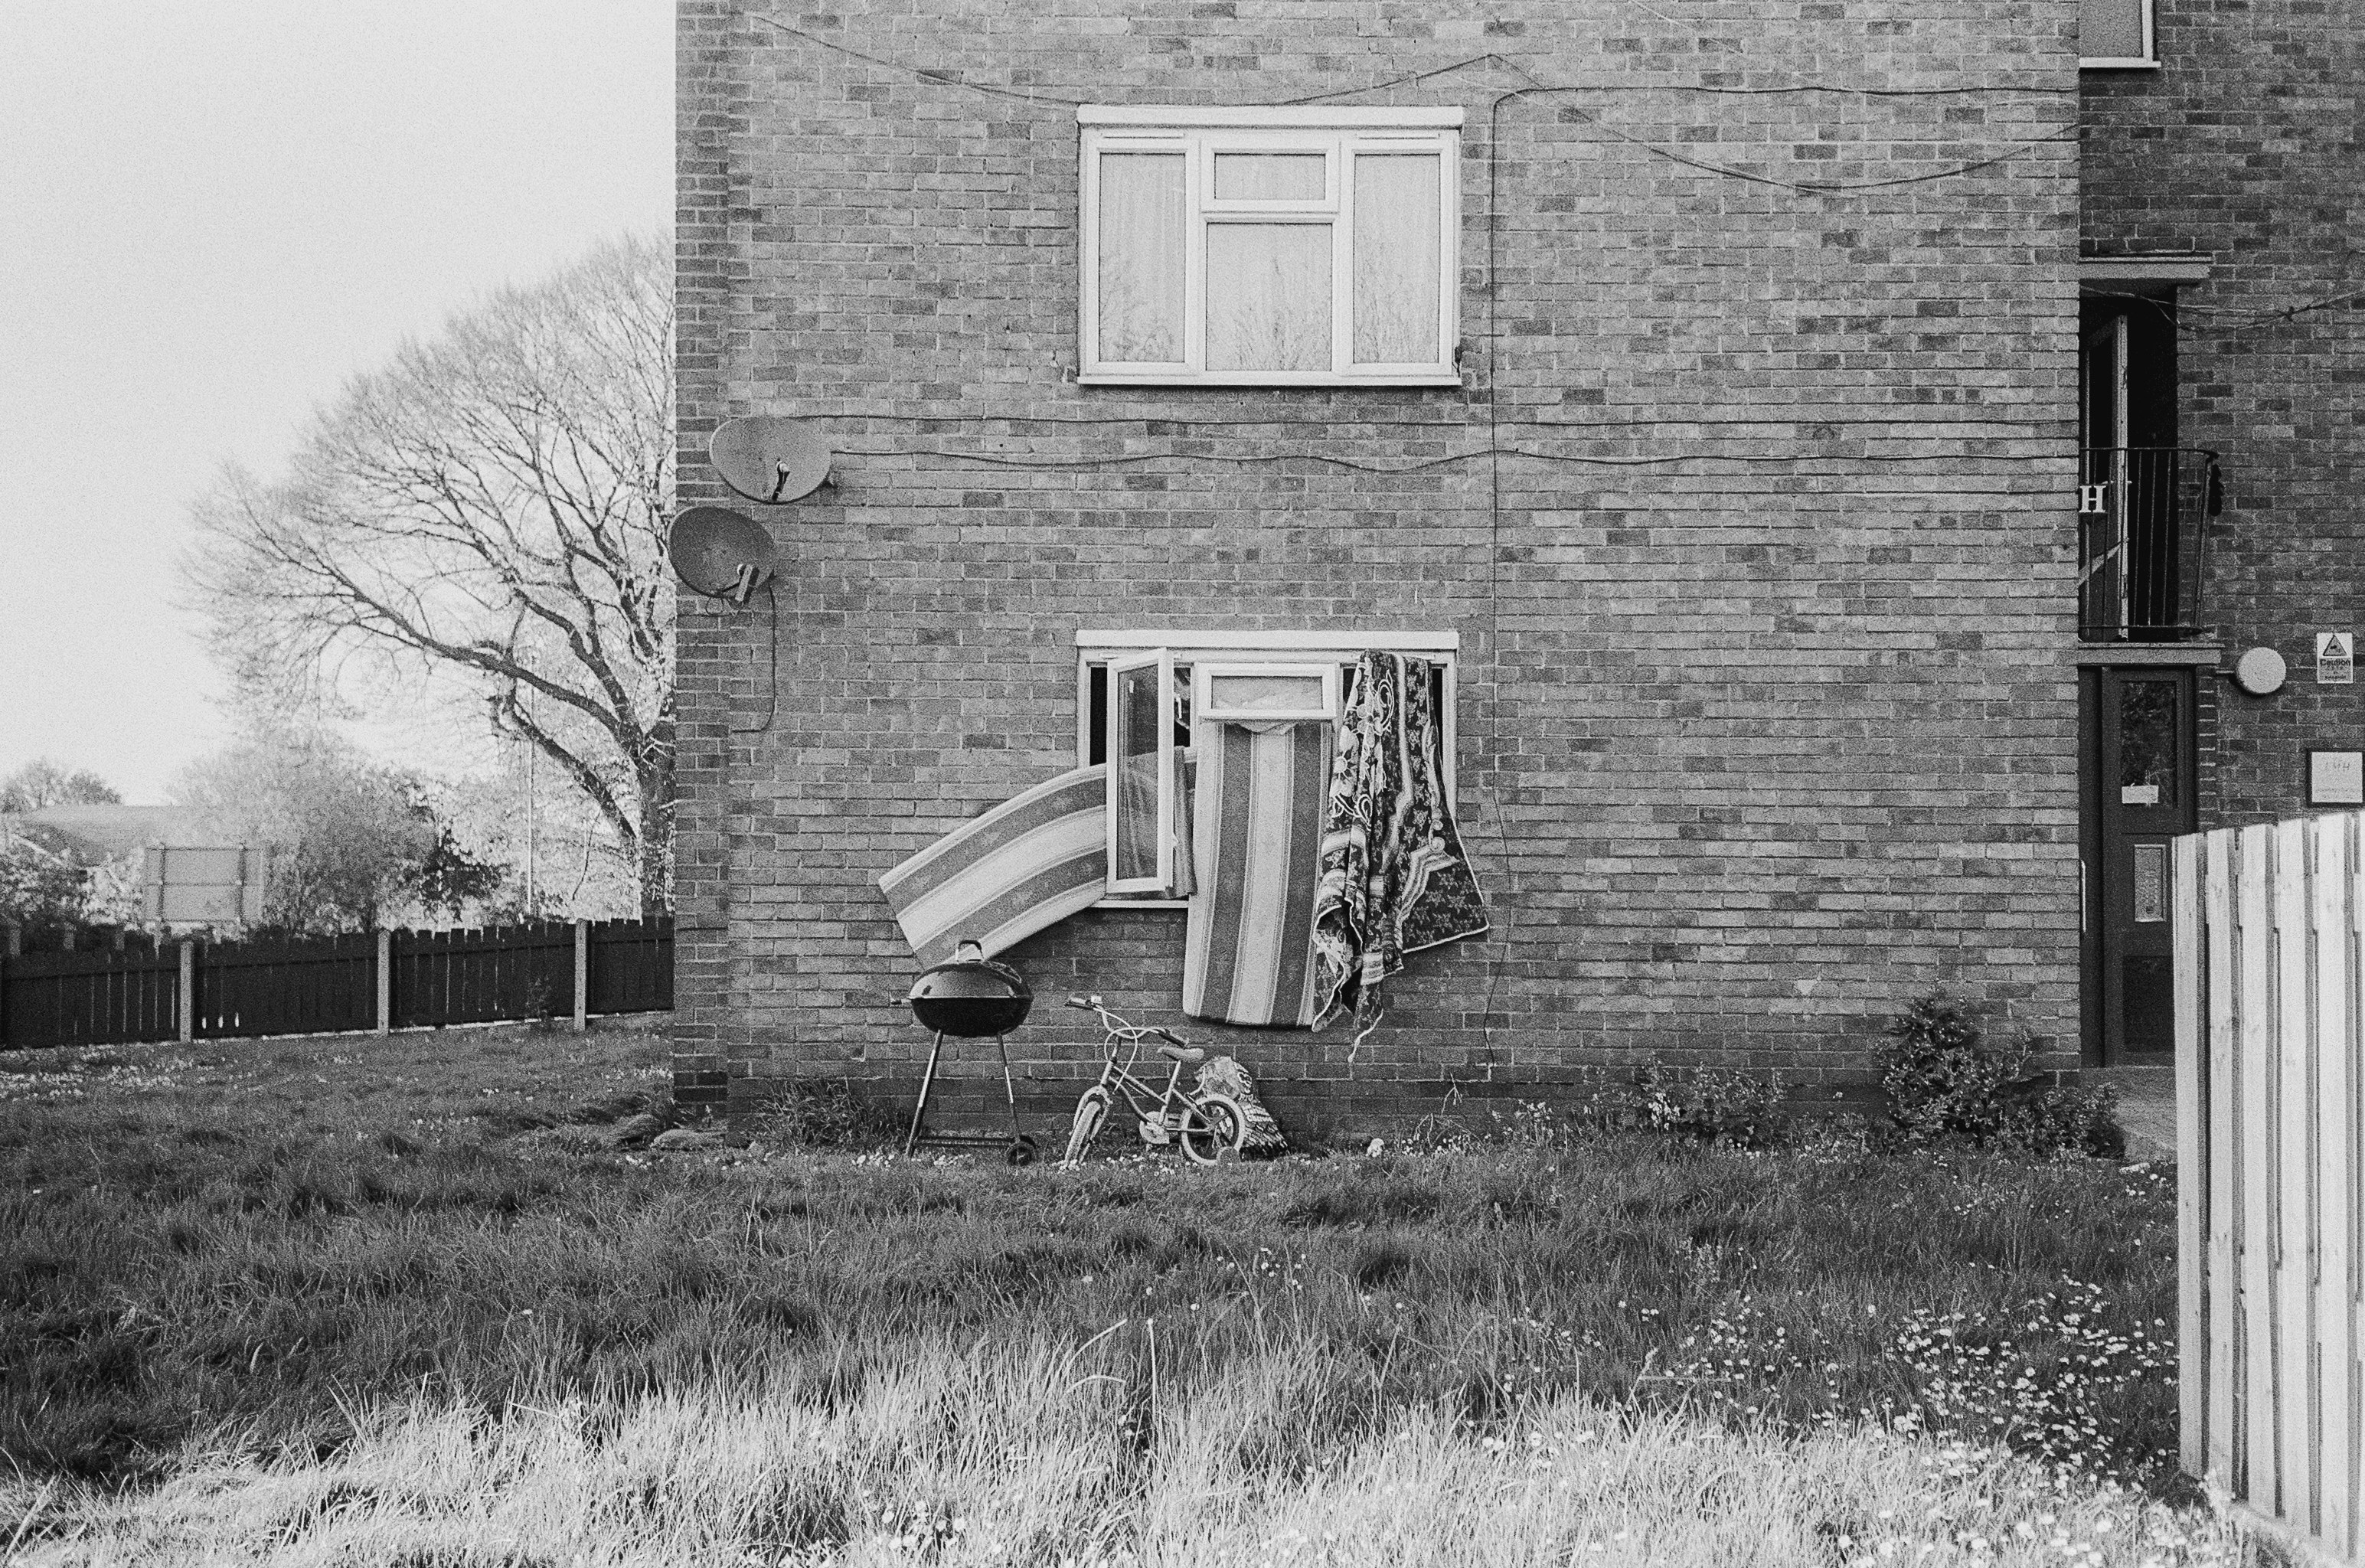 Laundry Day in L8. Shot on Ilford HP5 film stock.